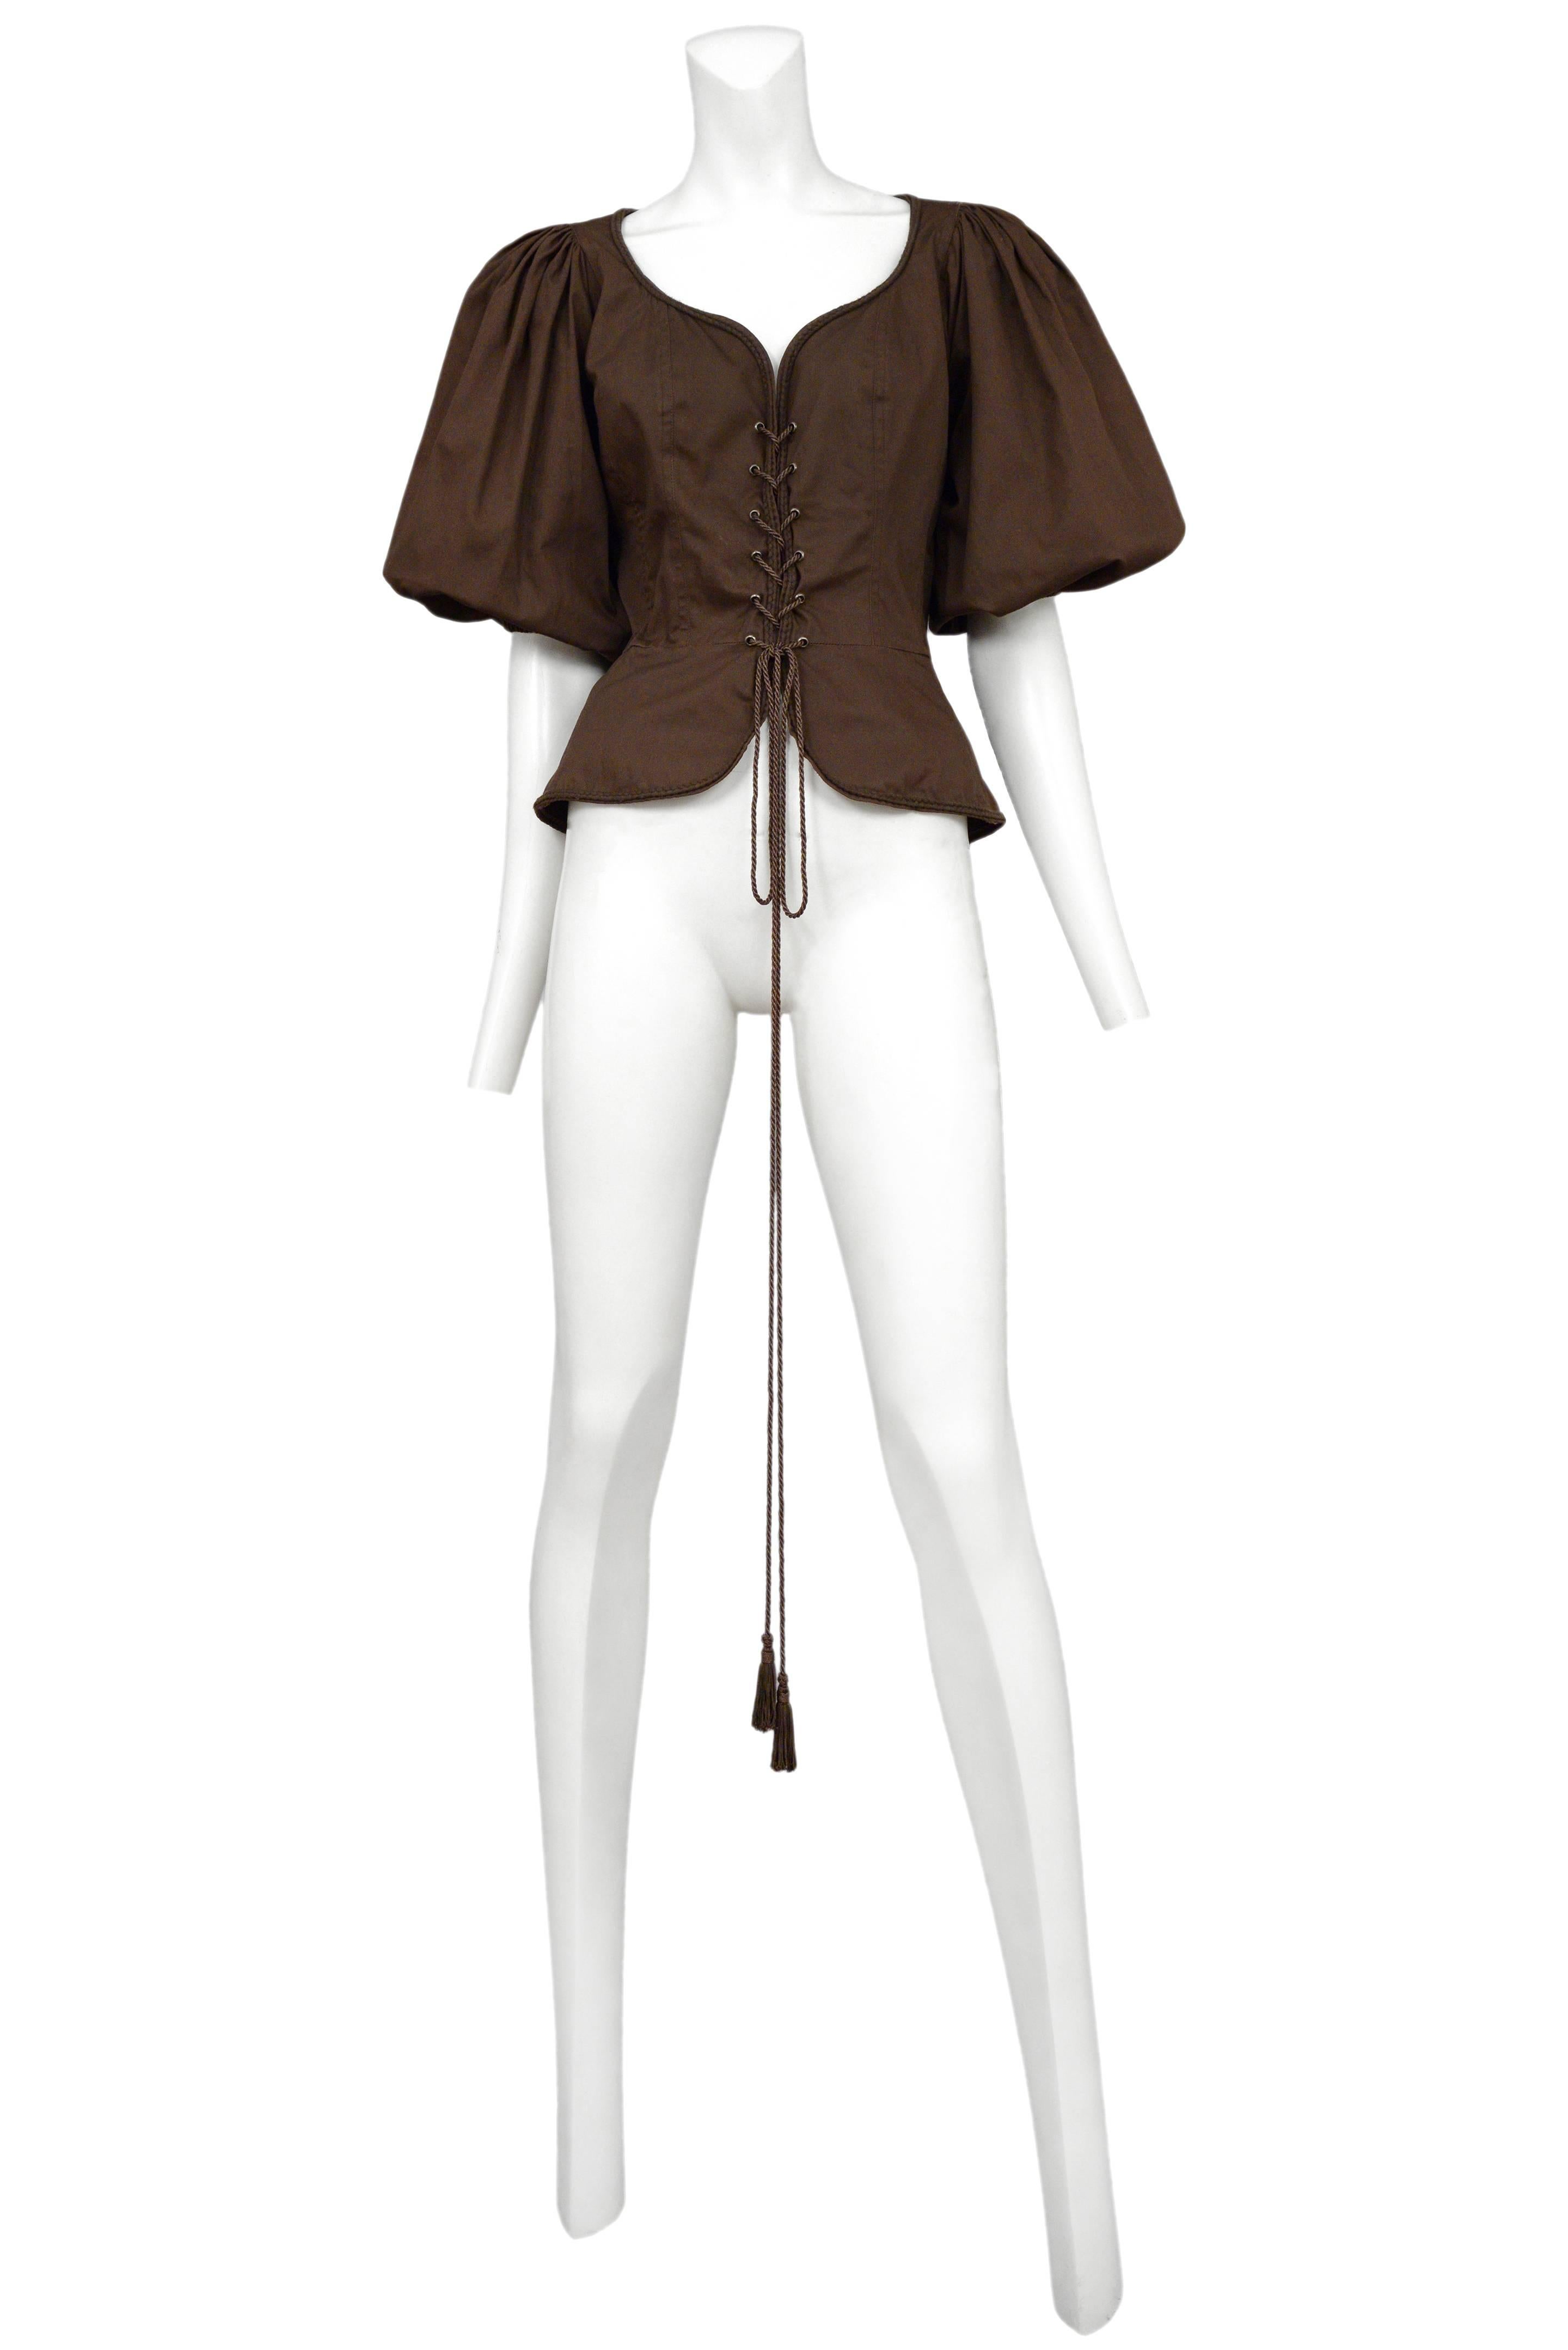 Vintage Yves Saint Laurent brown safari corset peasant top featuring a built in peplum below the waist, tassel cording lacing up the front and full peasant style sleeves.
Please inquire for additional images.